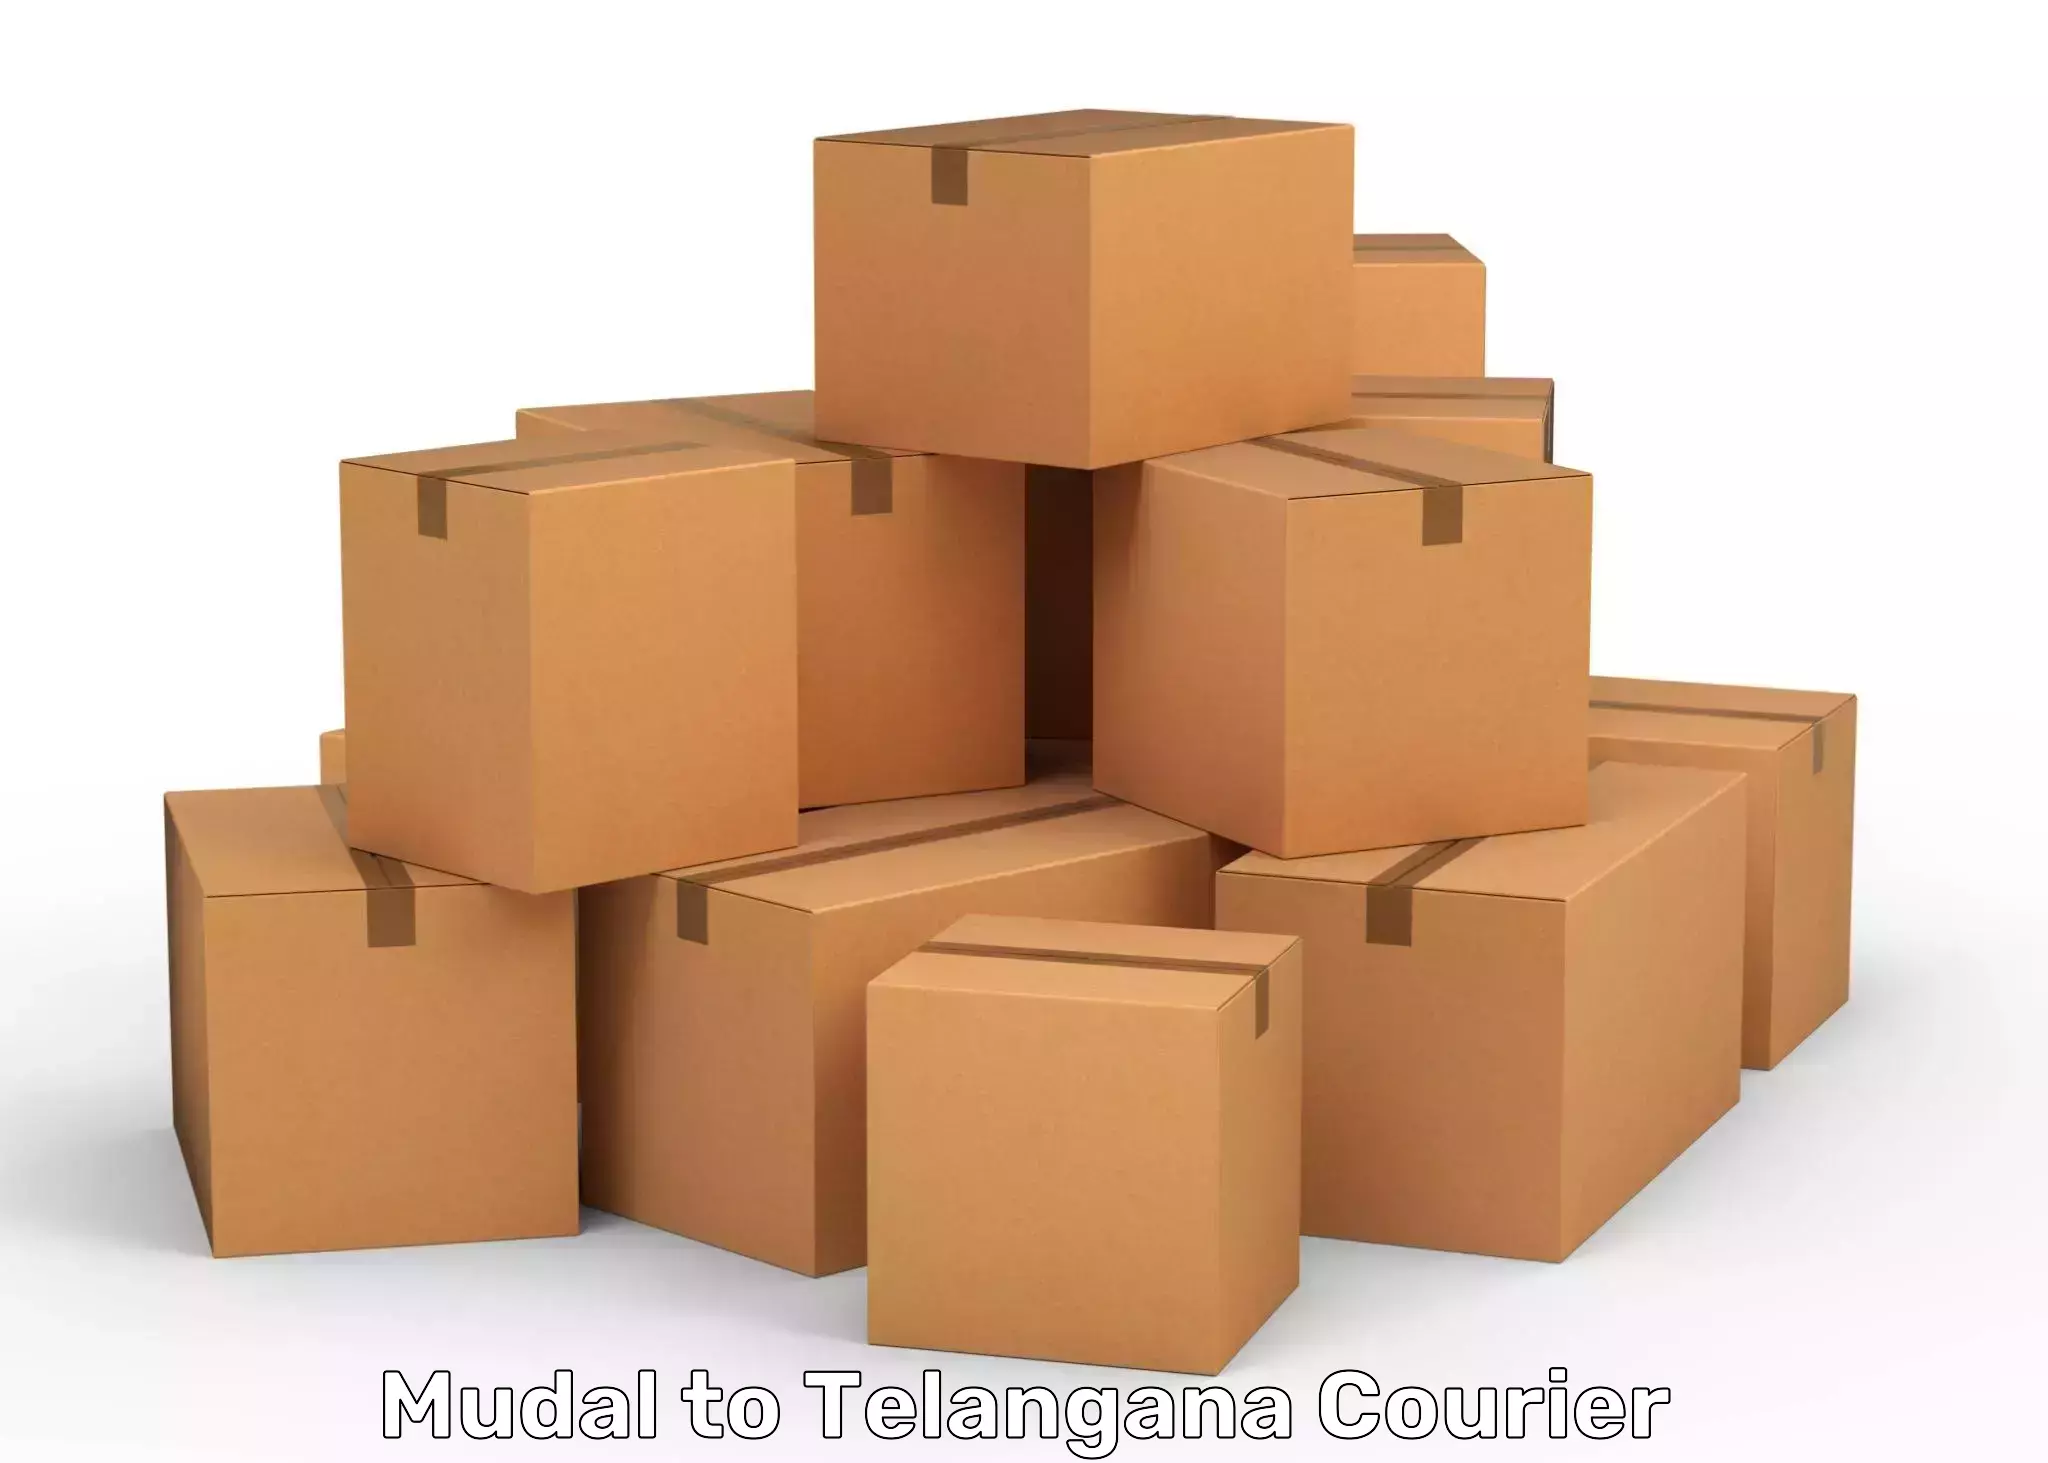 Express courier capabilities Mudal to Yellareddy